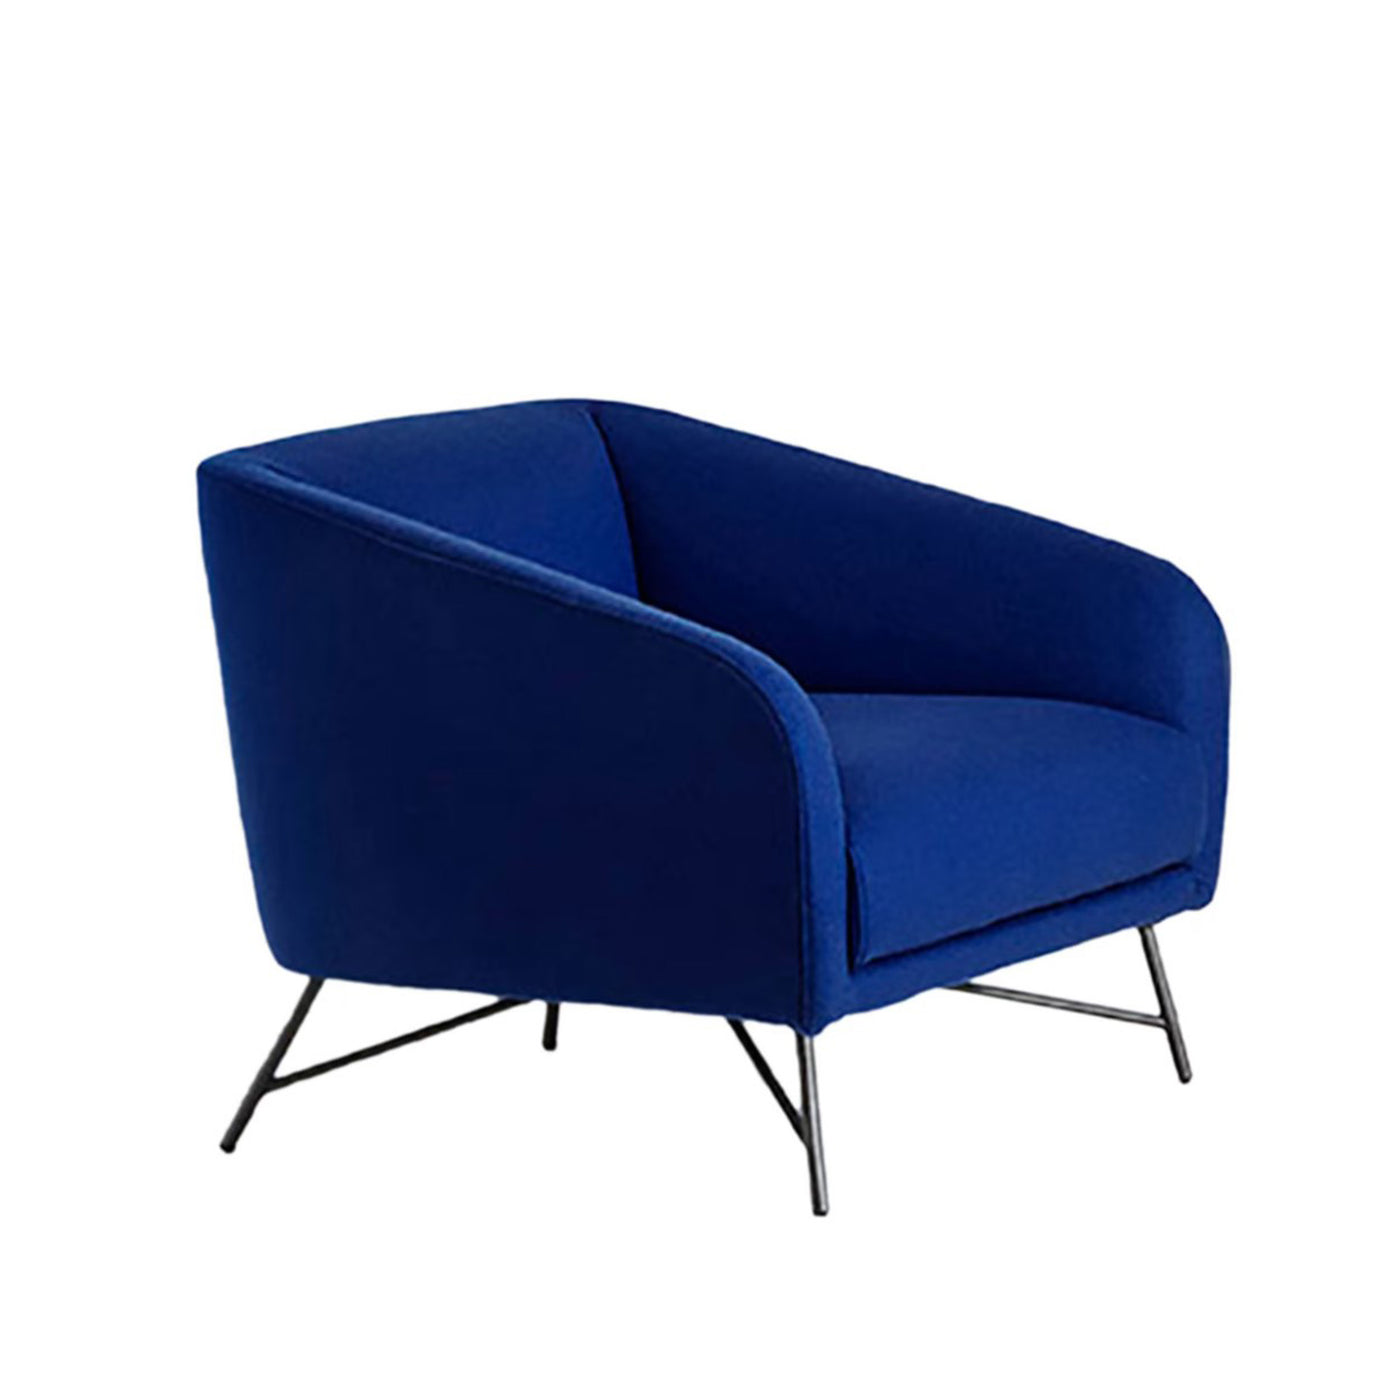 Armchair BETTY by Angeletti Ruzza for MyHome Collection 01